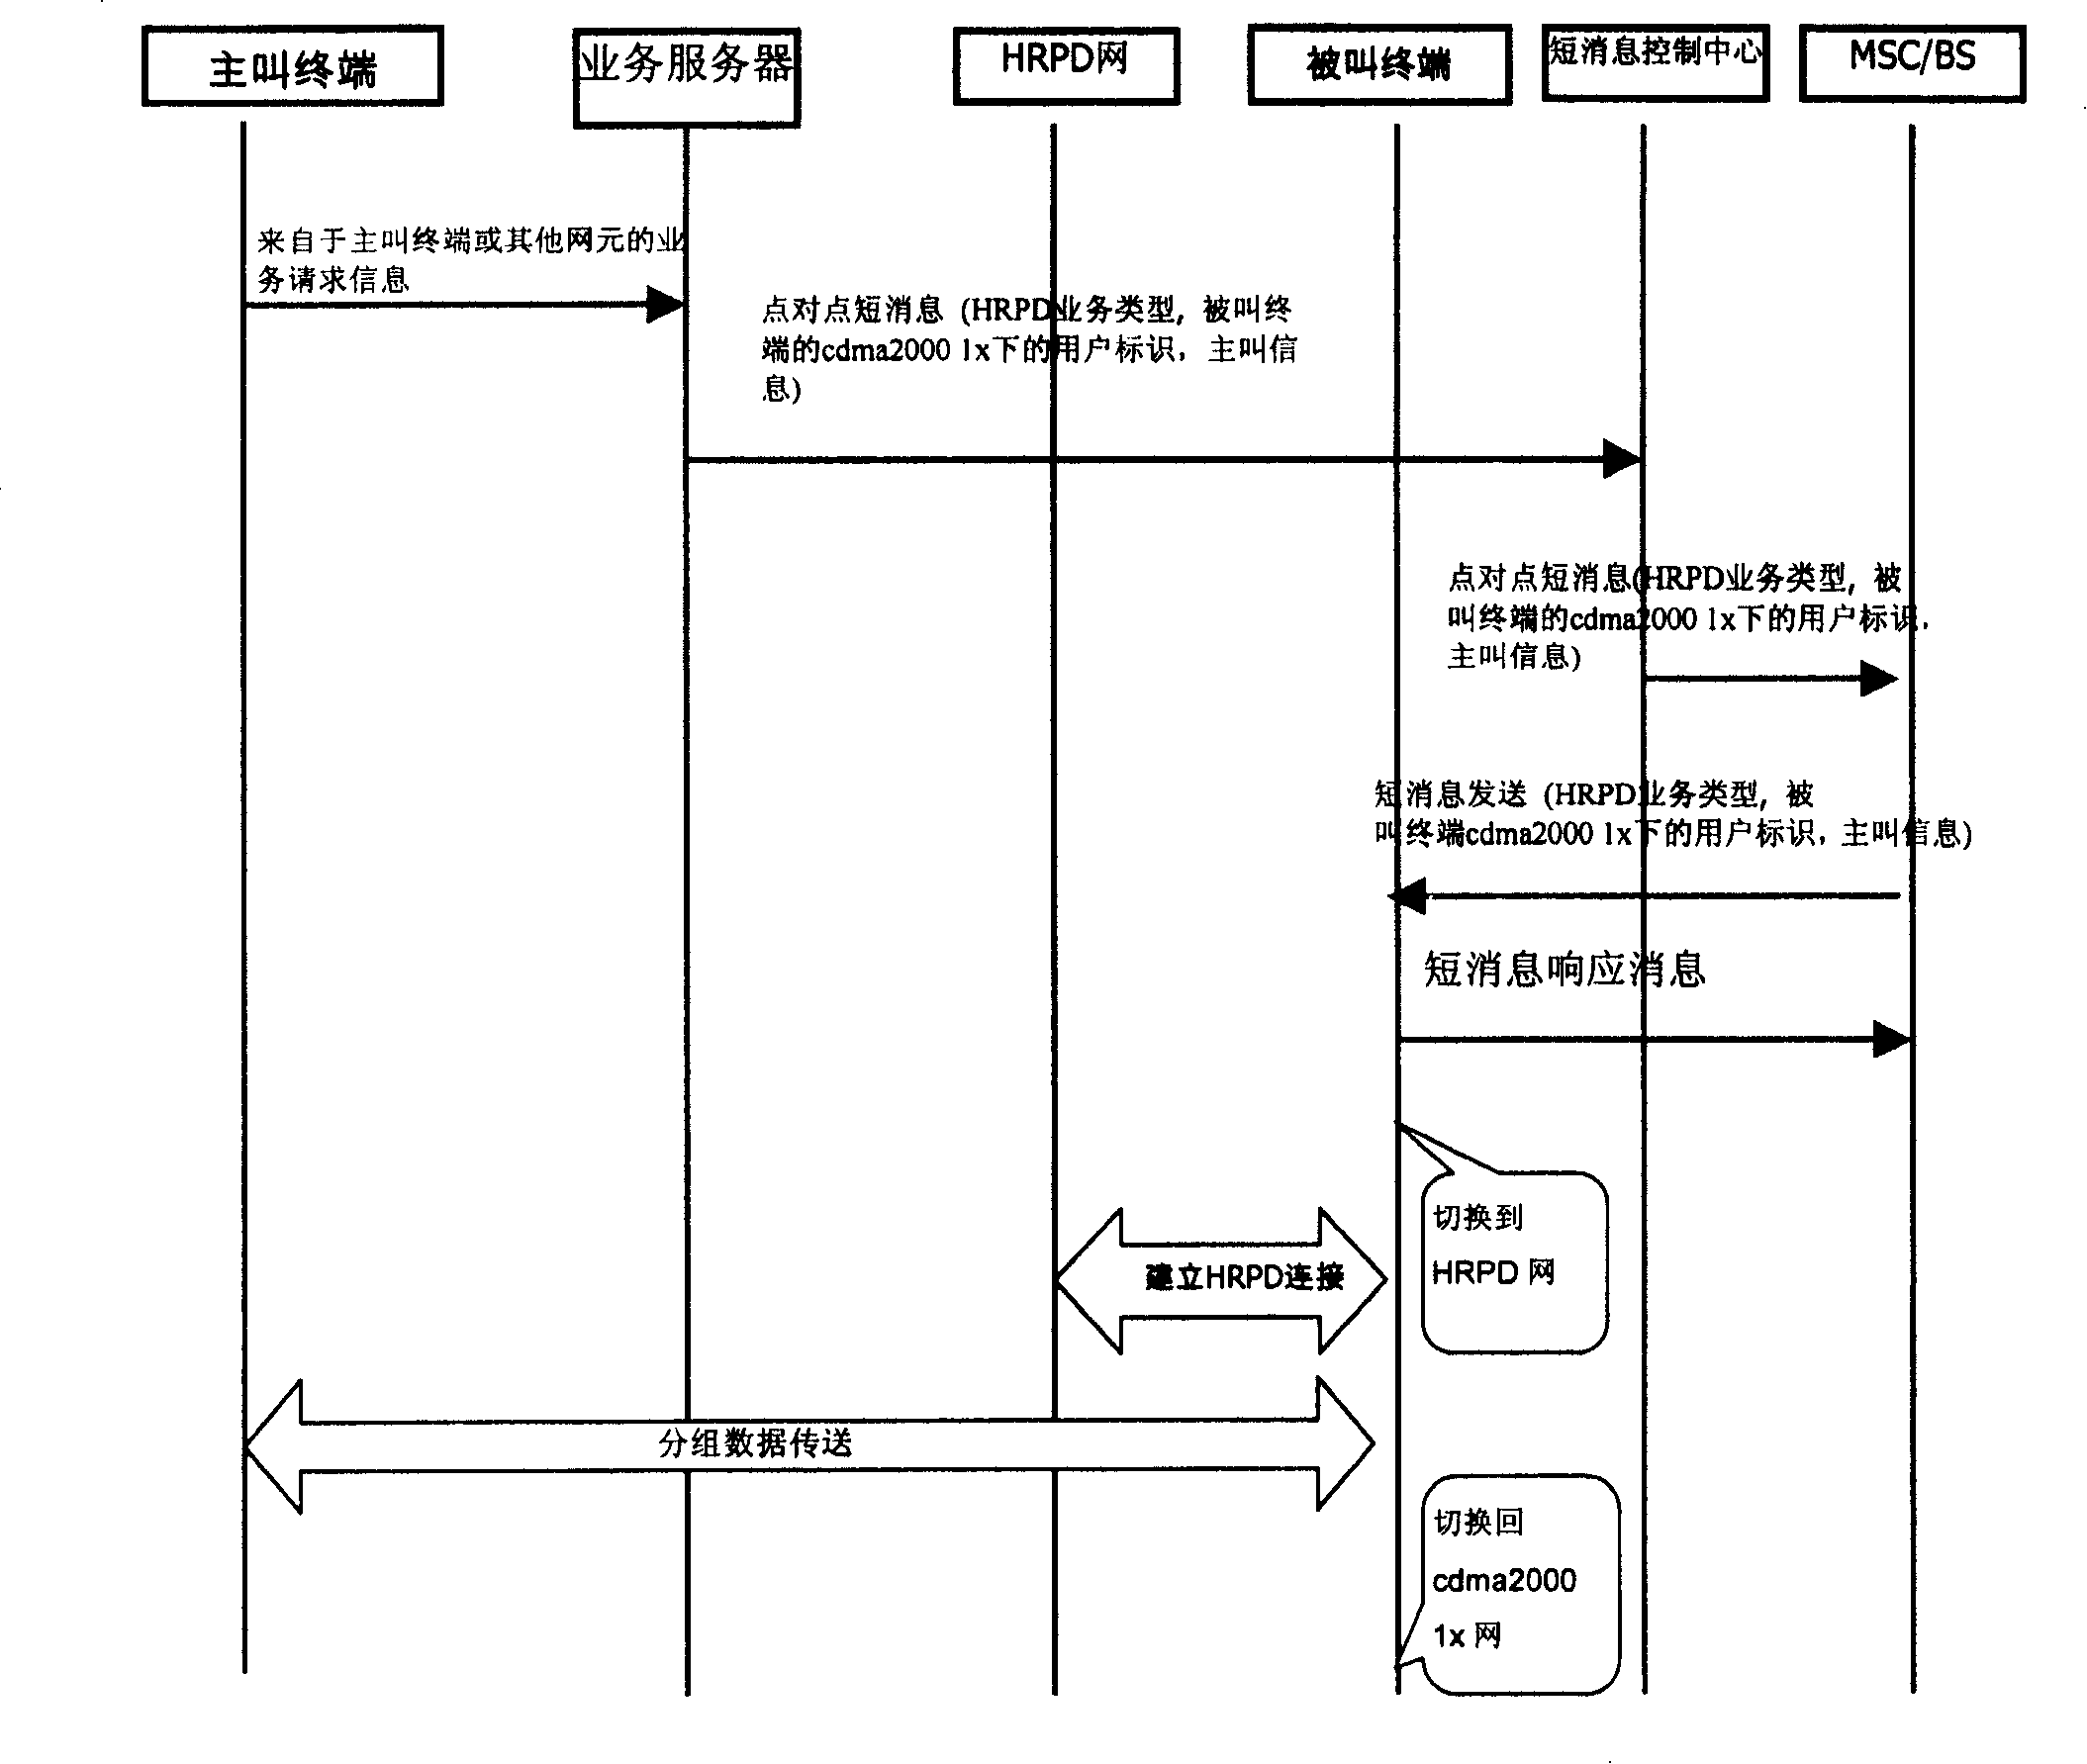 Method of paging information transmission between CDMA2000 1X and HRPD network